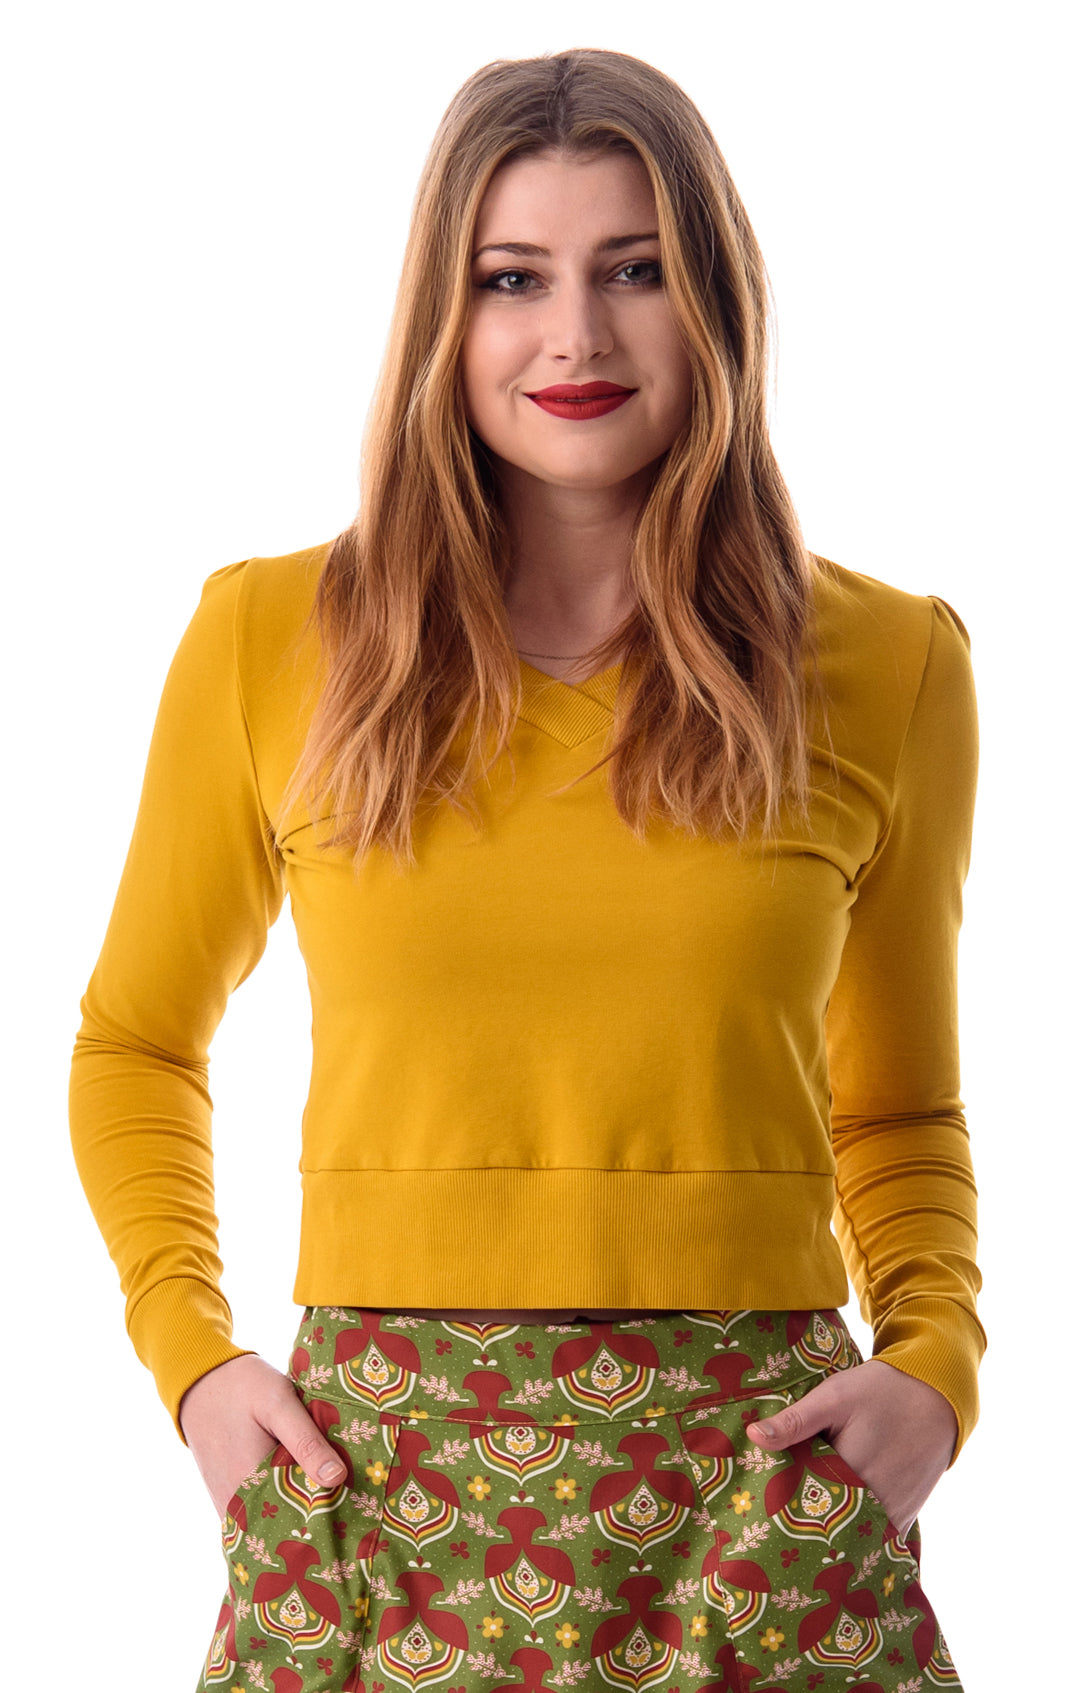 Mustard yellow v-neck French terry top on long-haired model with cute skirt